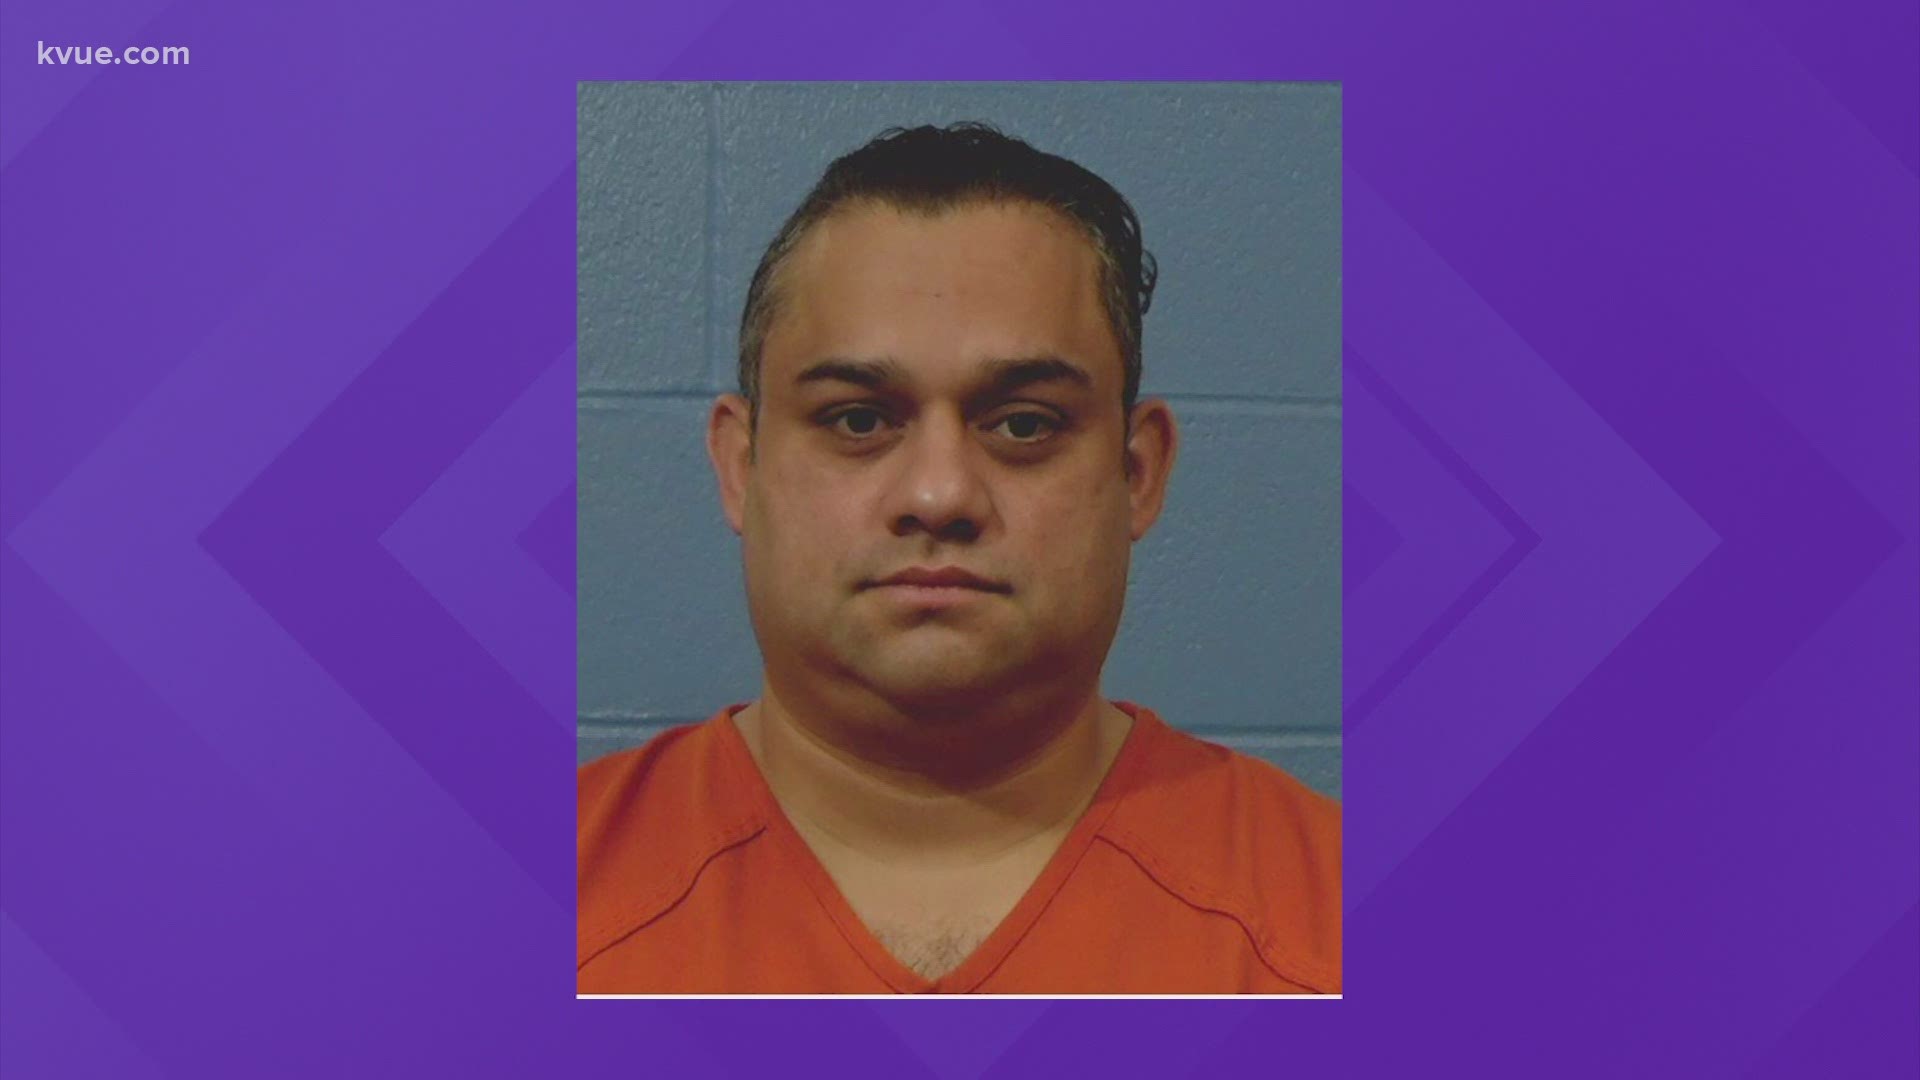 A former Williamson County sheriff's deputy is out of jail on bond after a violent encounter with a domestic violence victim led to his arrest.